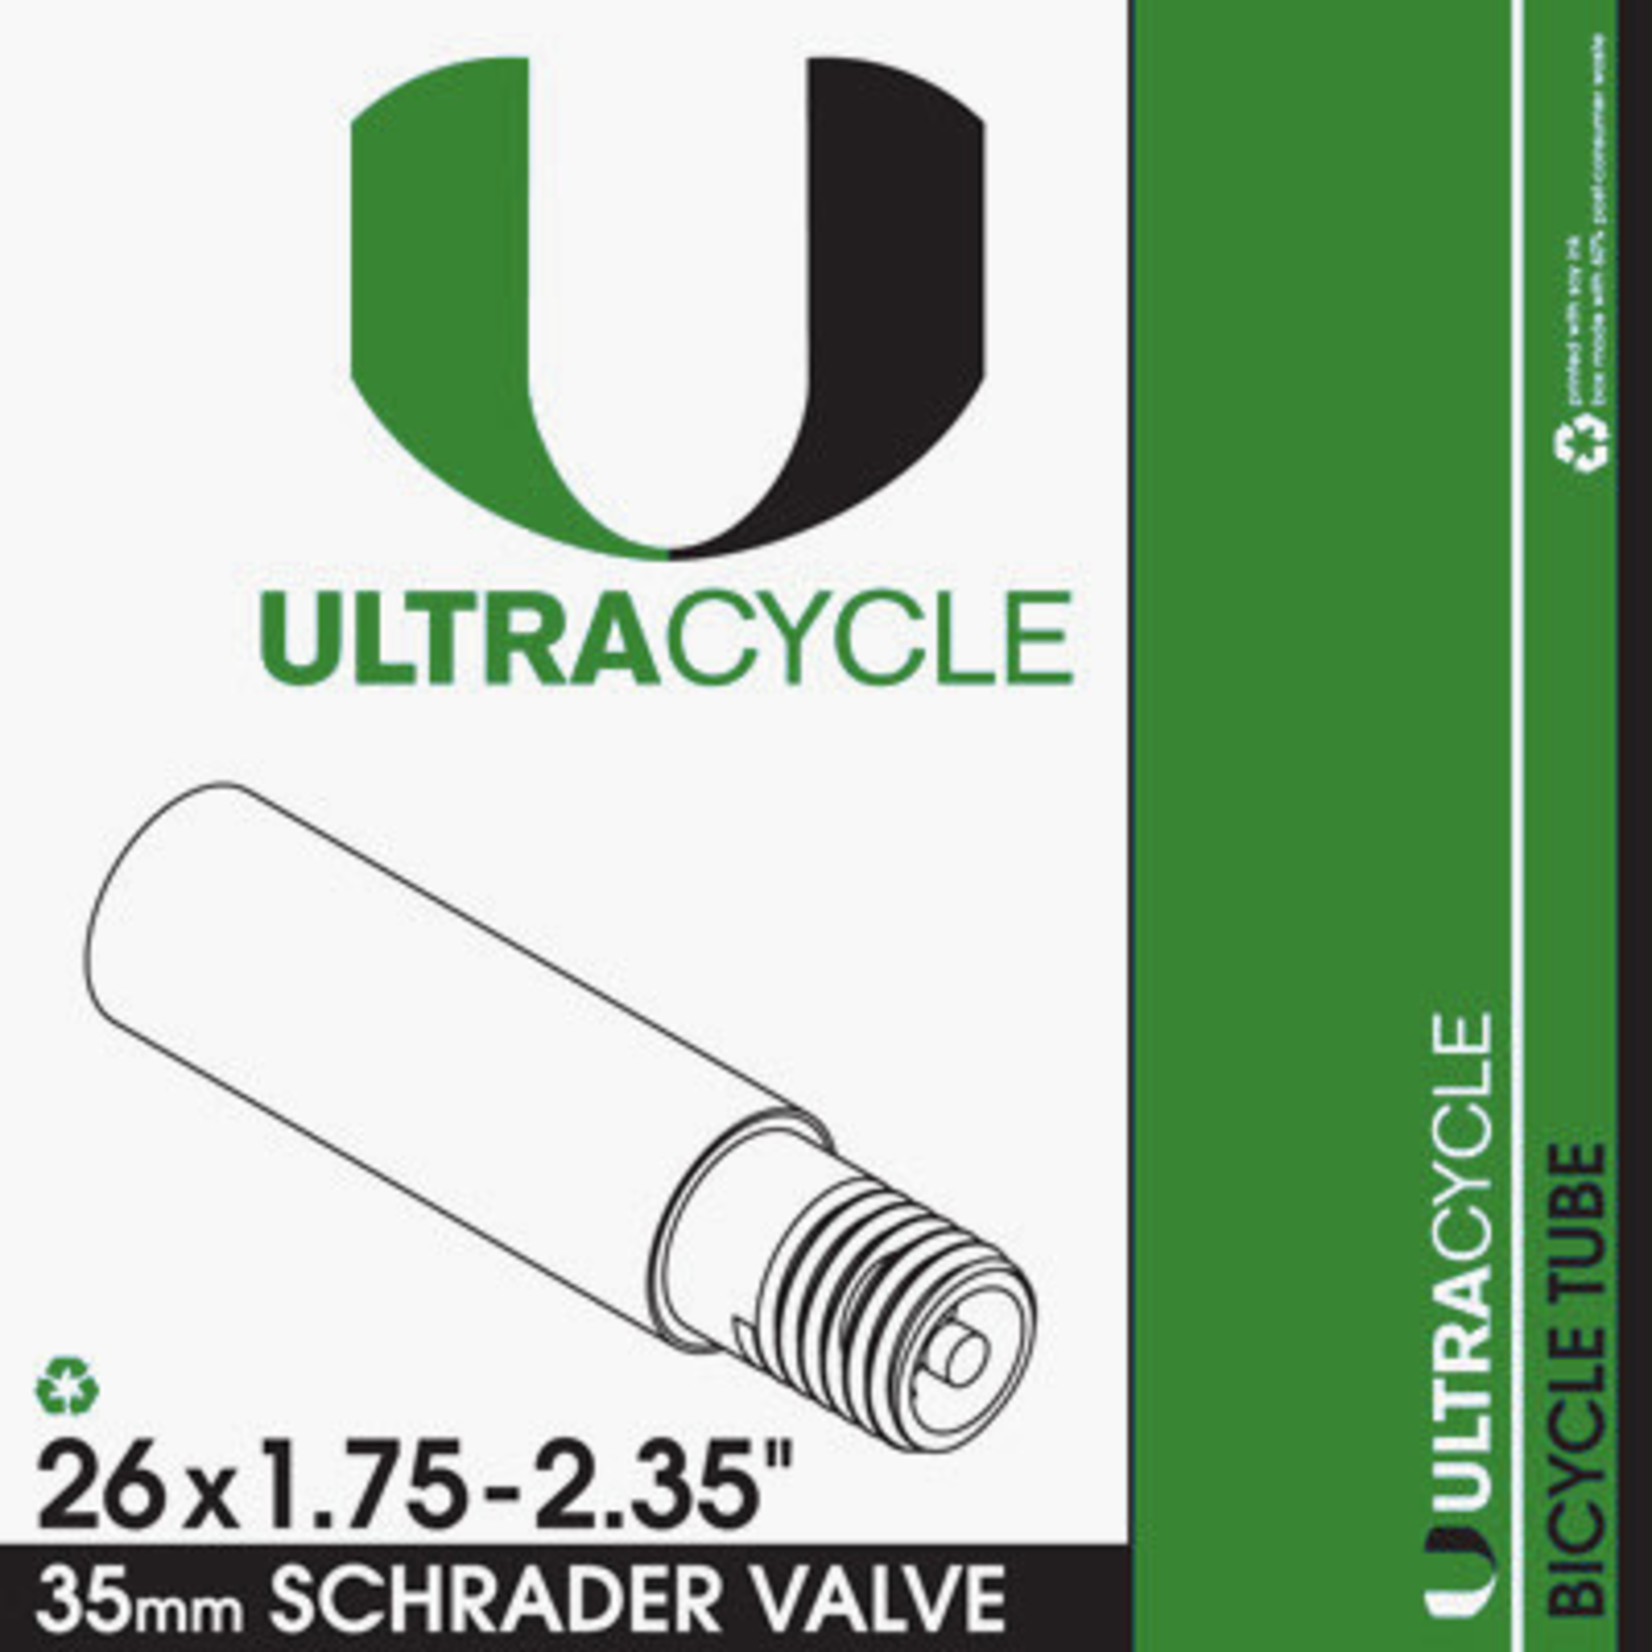 ULTRACYCLE ULTRACYCLE,SCHRADER VALVE TUBES,UC 26X1.75-2.35 TUBE,SV